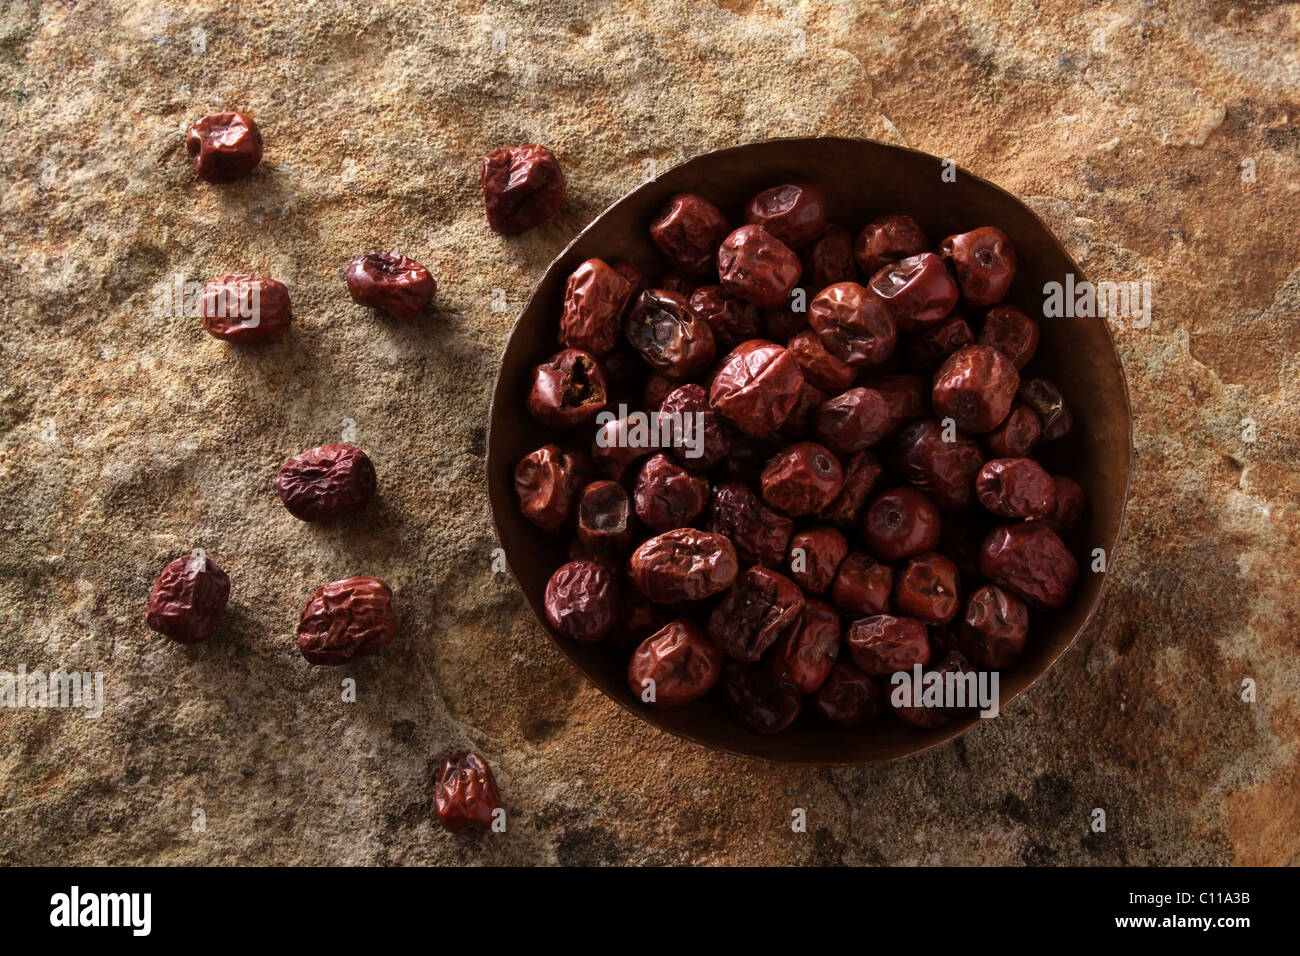 Jujube berries (Ziziphus jujuba) in a copper bowl on a stone surface Stock Photo